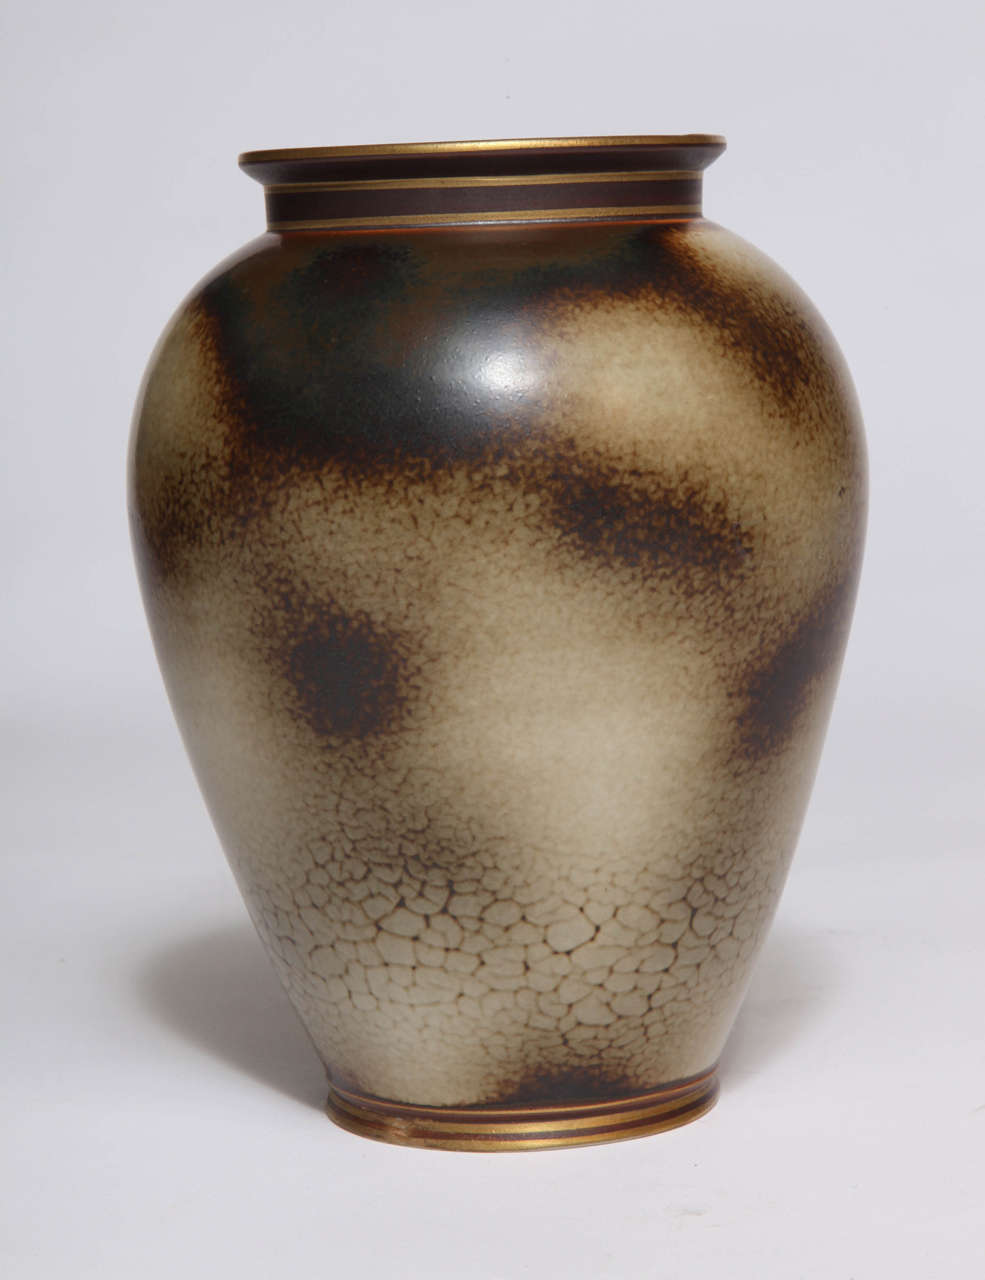 A beautiful ceramic vase with a stunning glaze by Gunnar Nylund for Rörstrand. Sage and brown glaze, with gold trim. Signed.